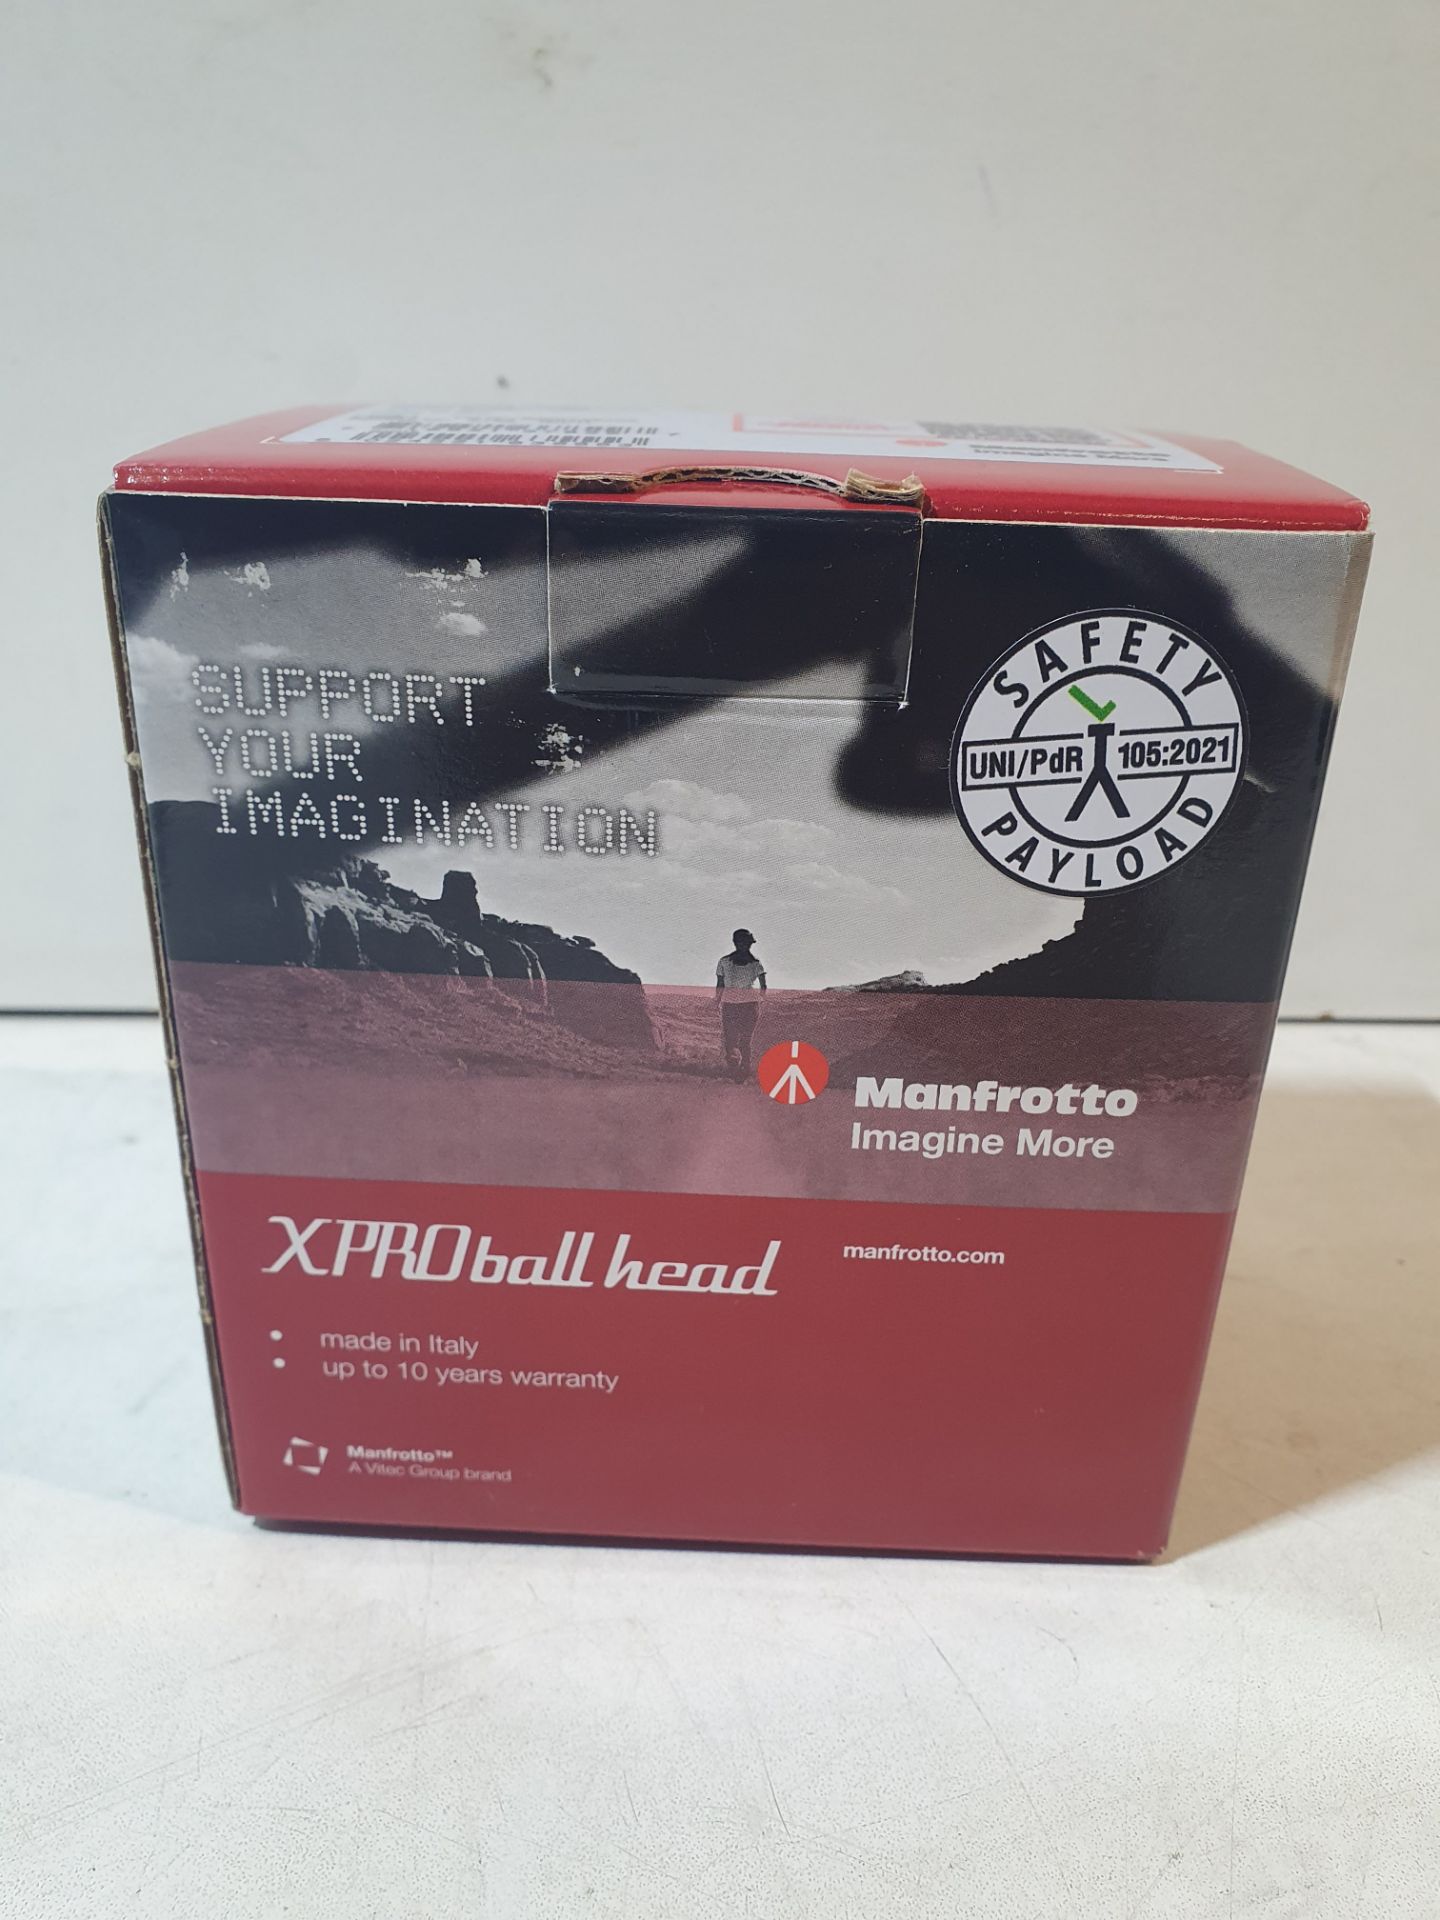 Monfrotto XPRO Ball Head with 200PL Triple Locking System MHXPRO-BHQ2 - Image 8 of 10